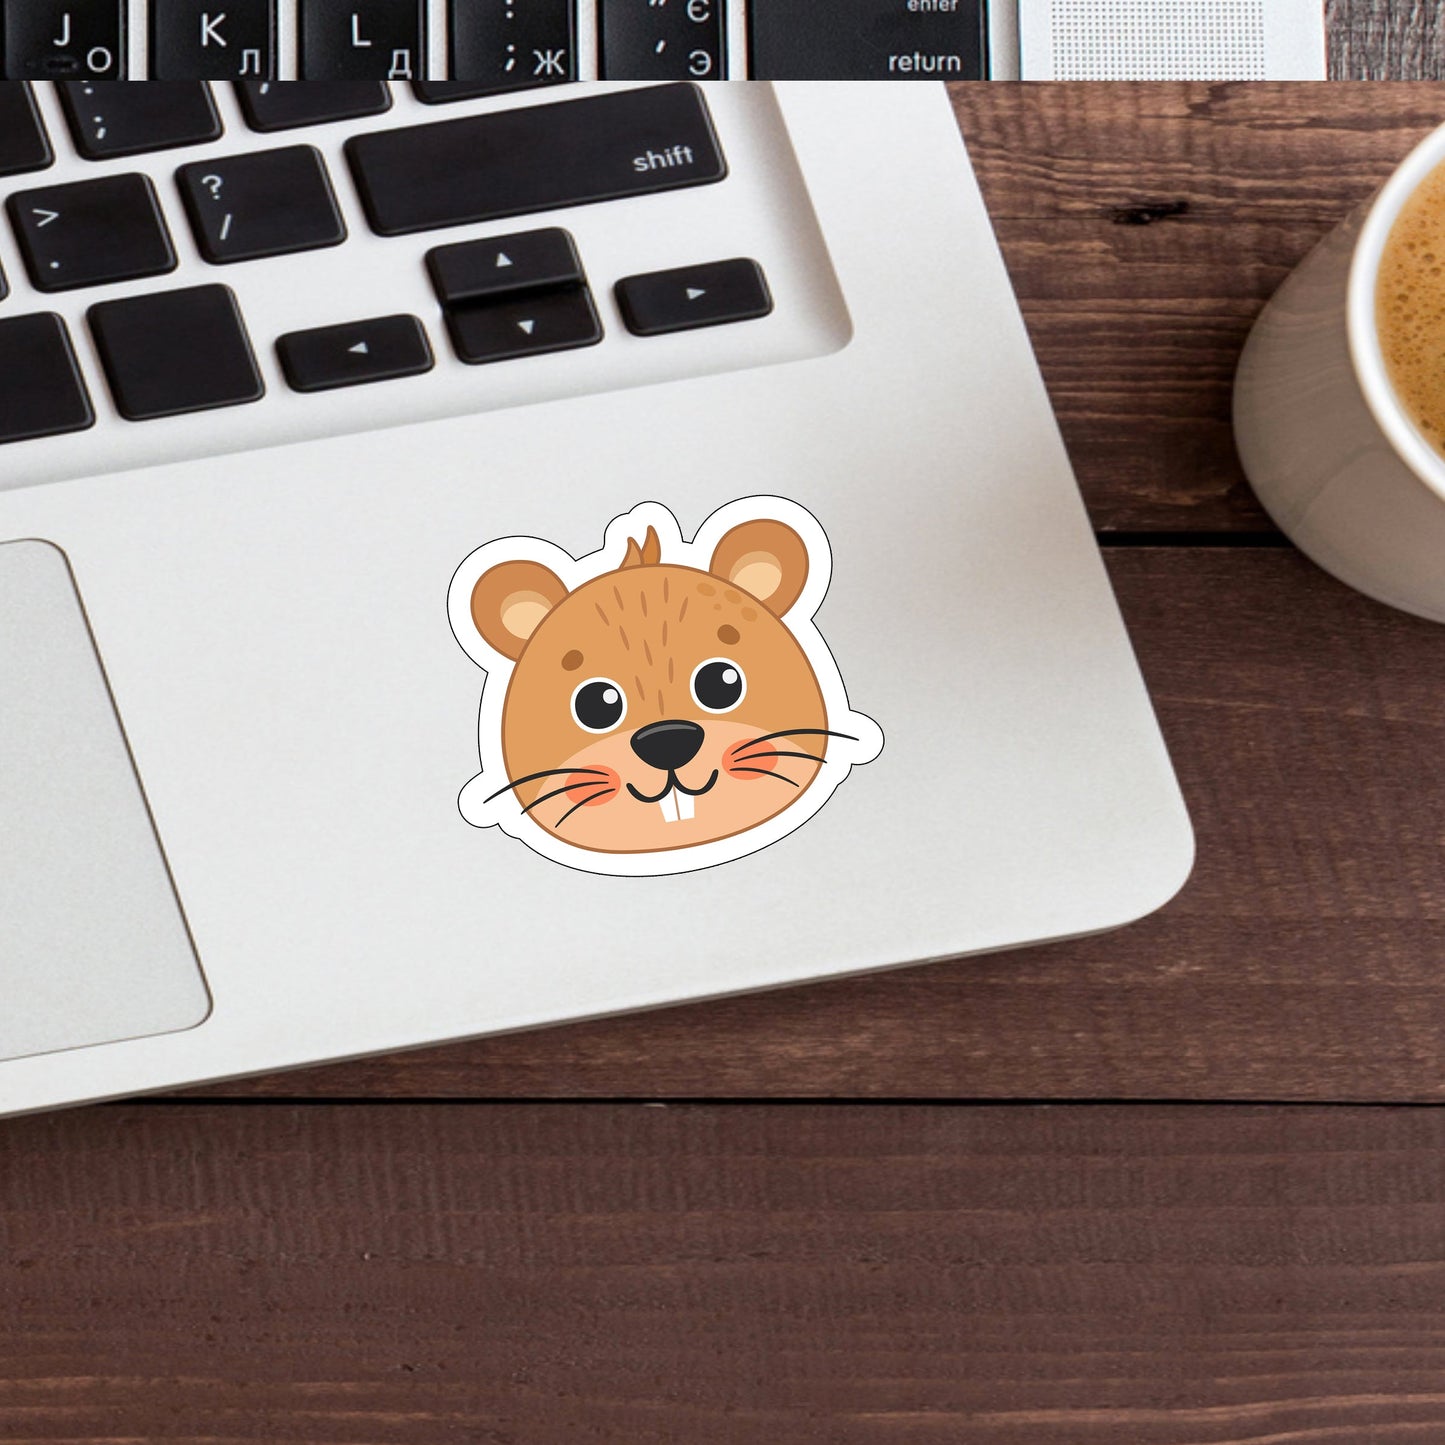 a cup of coffee next to a laptop with a sticker of a mouse